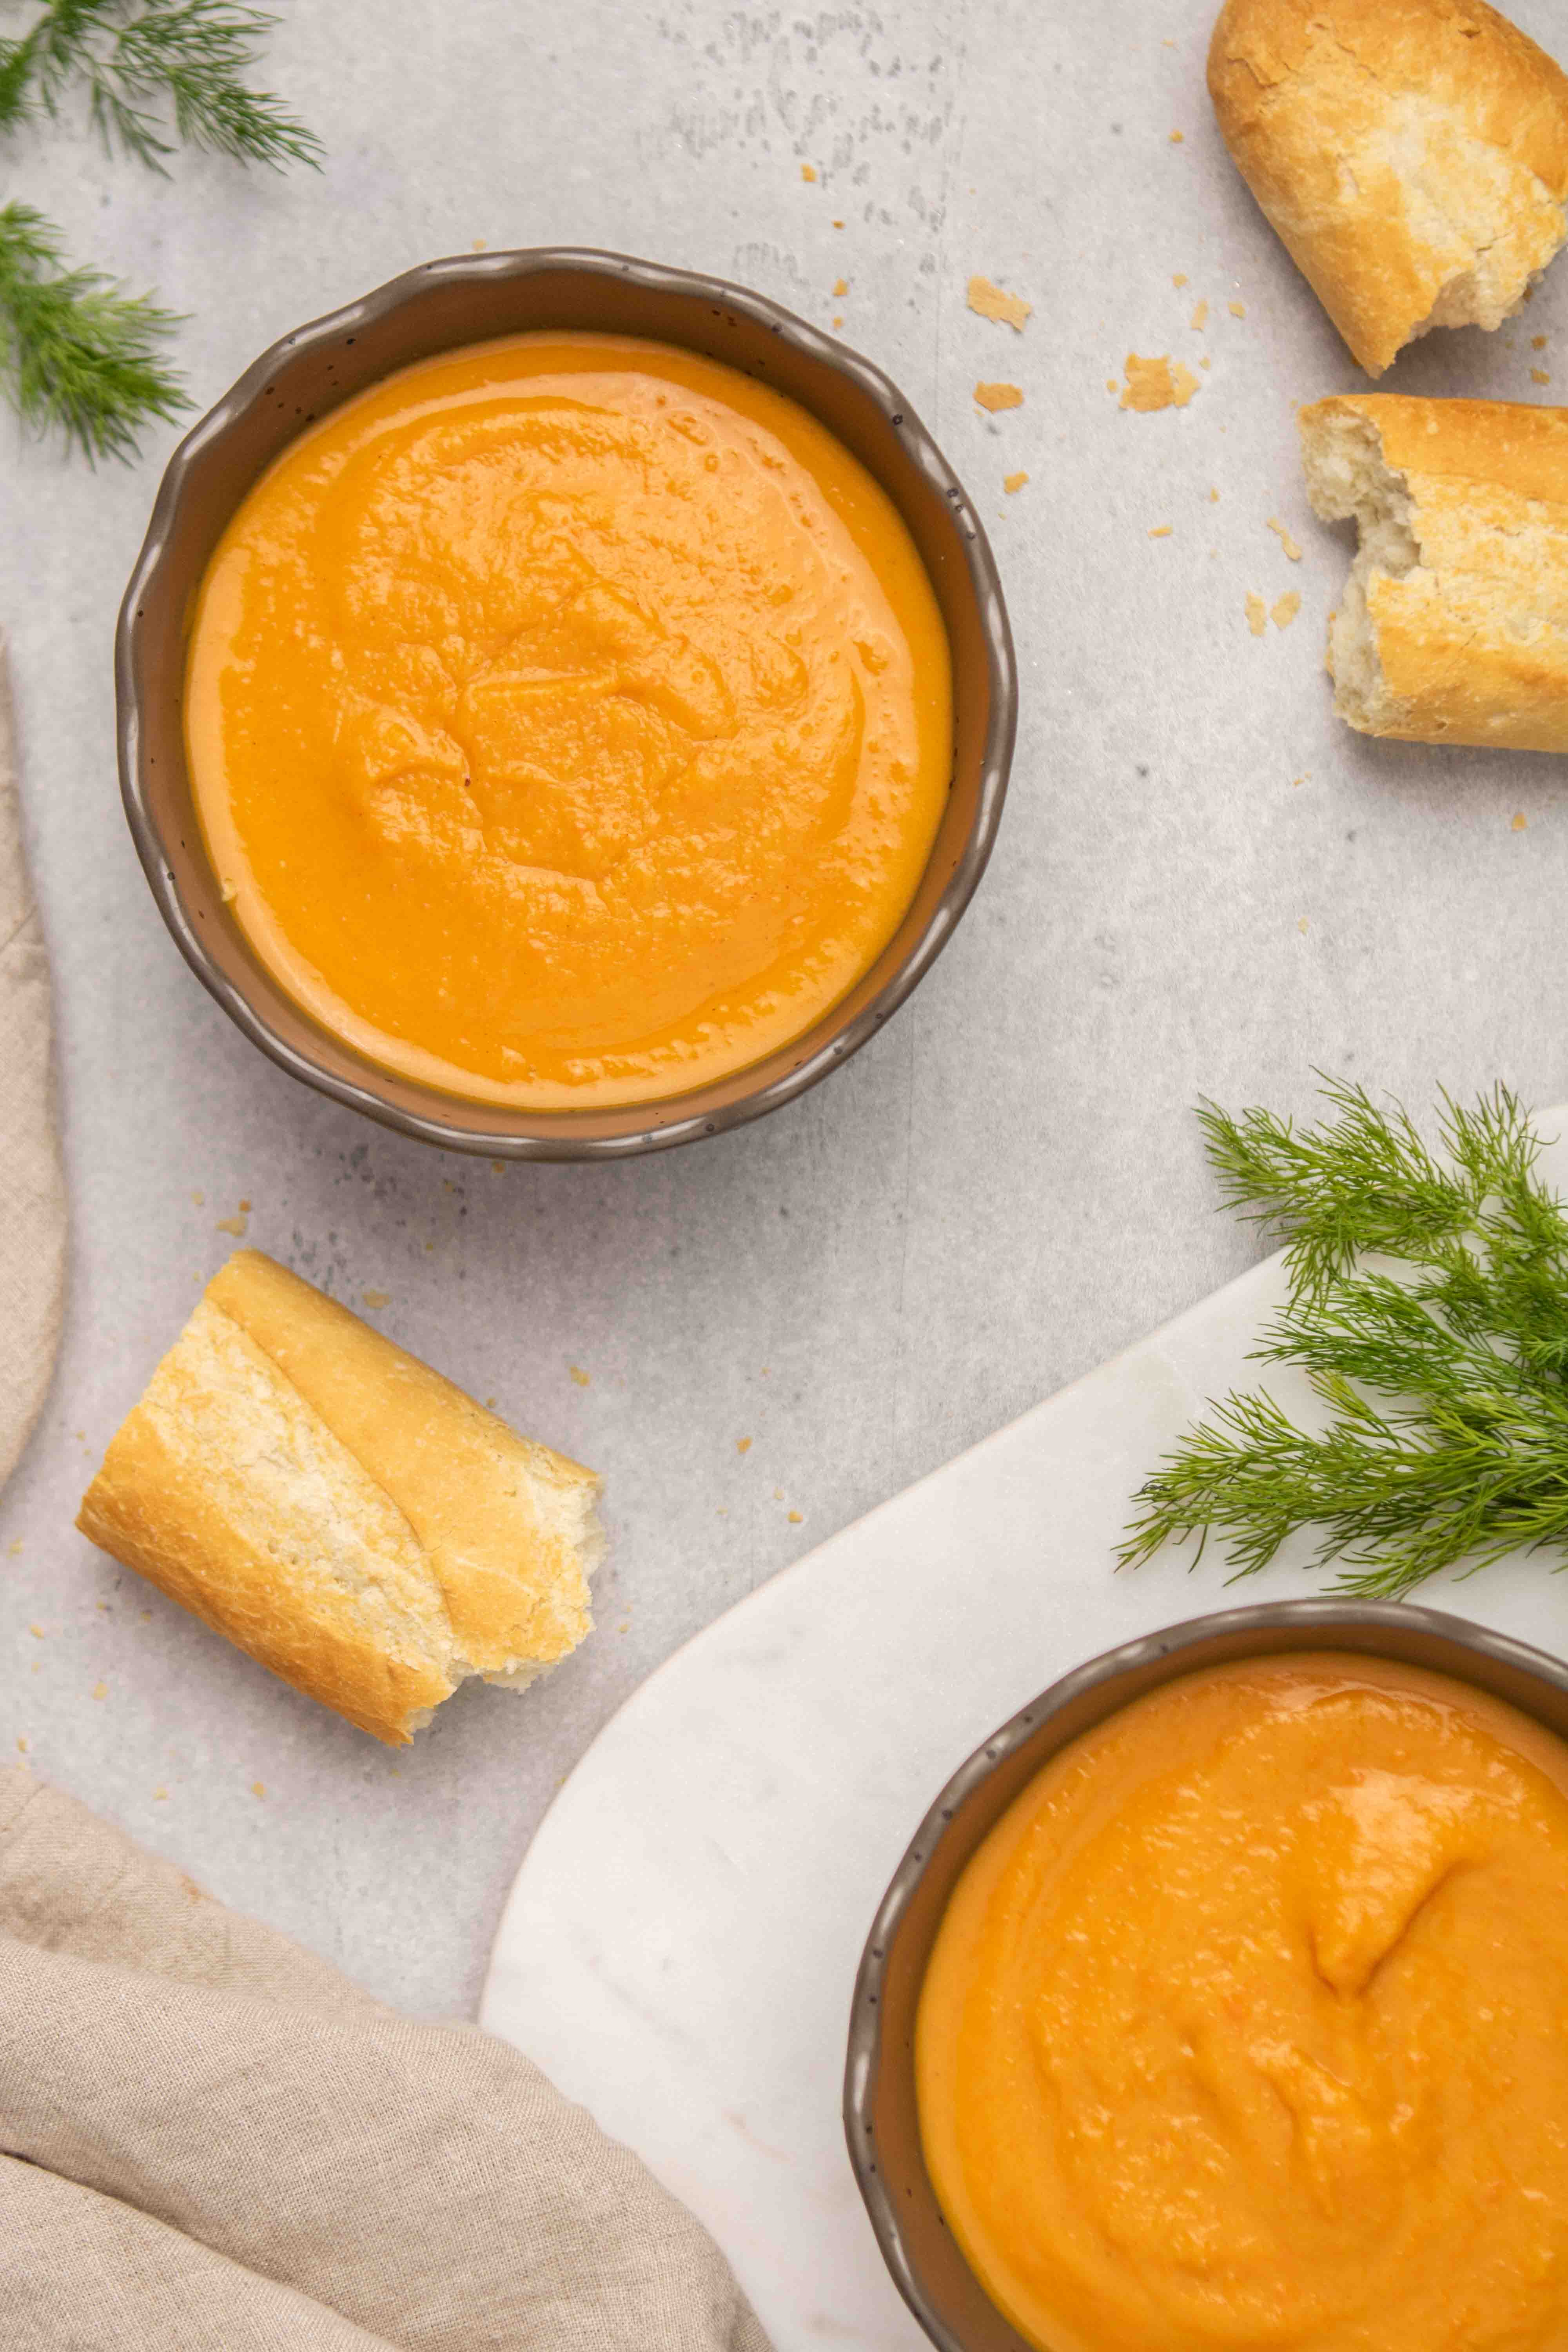 How to serve carrot and sweet potato soup